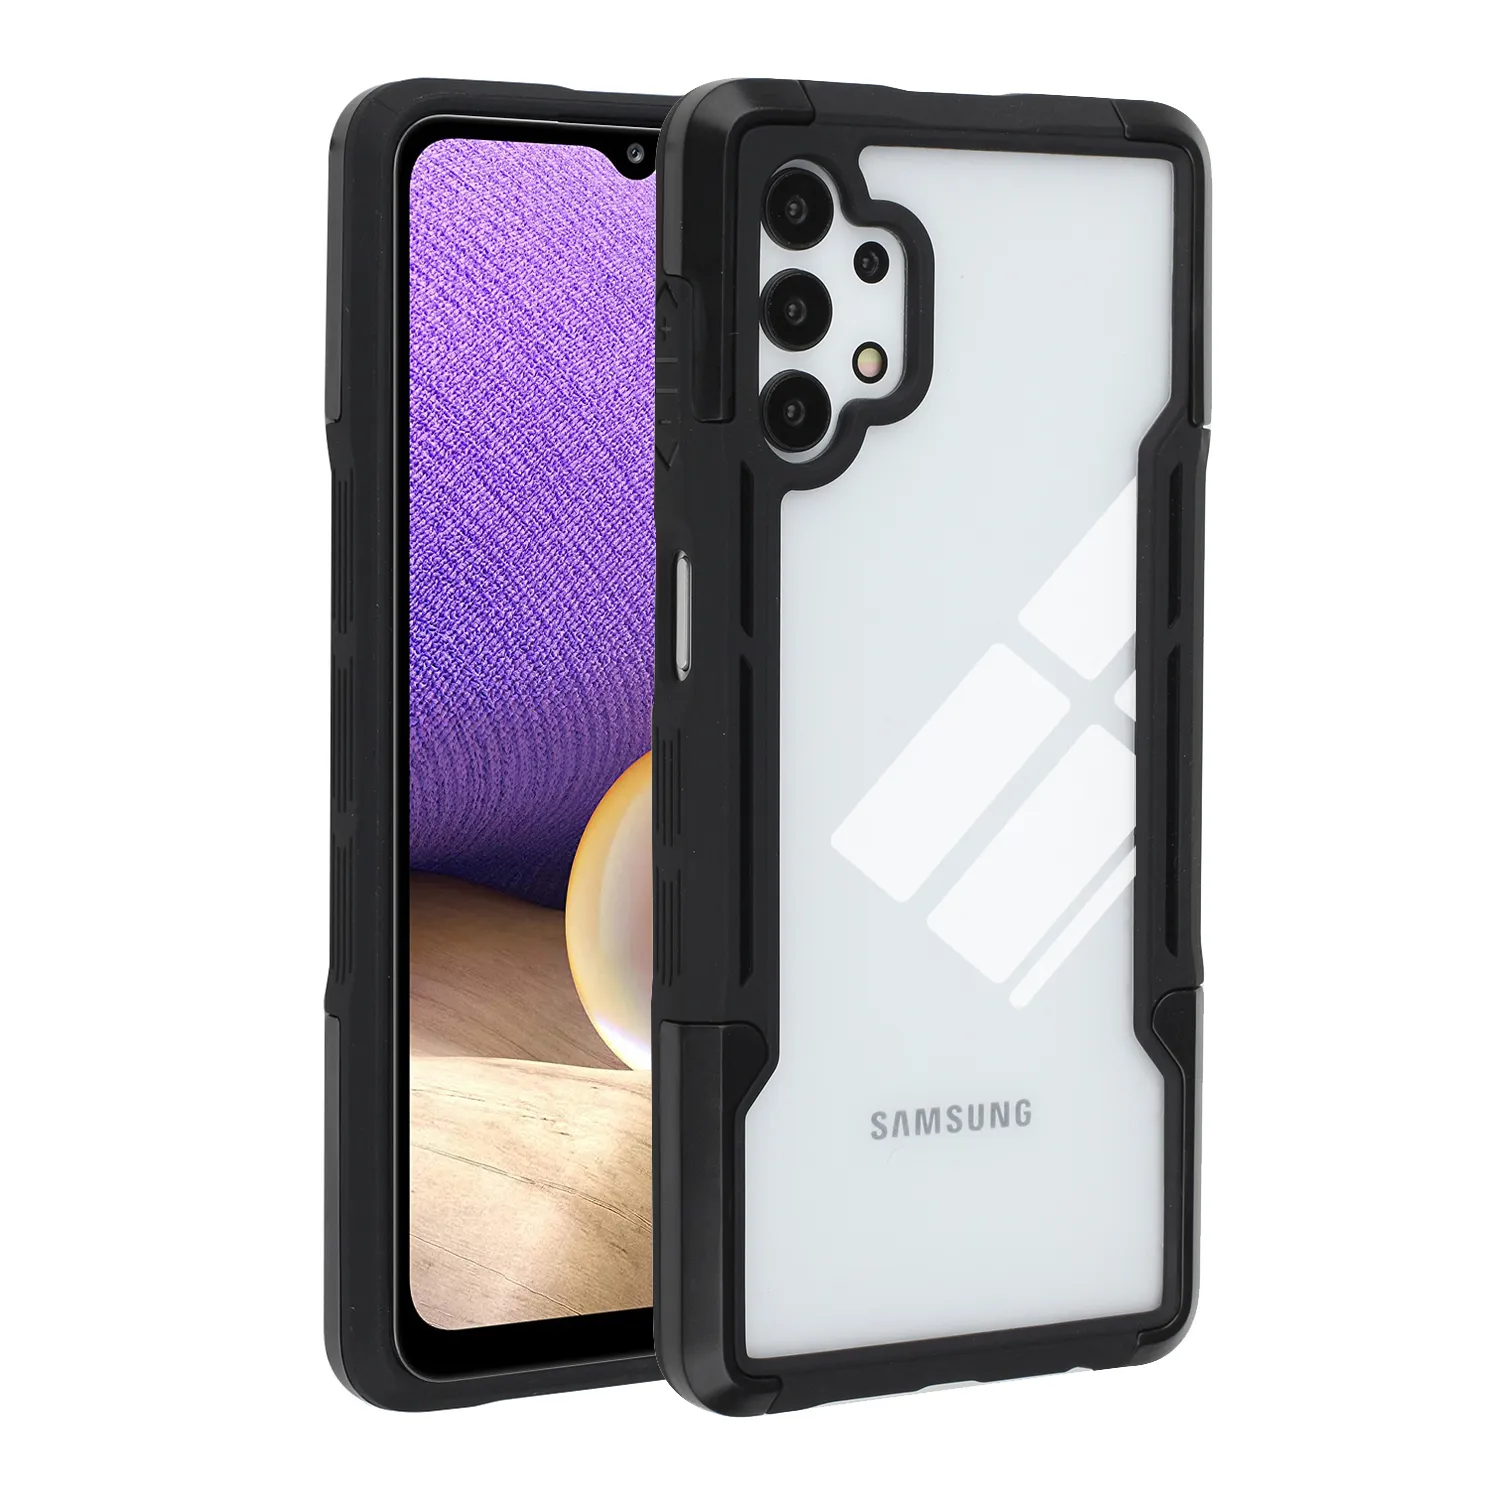 Shockproof Armor Cases For Samsung Galaxy A32 5G Soft TPU Silicone Bumper Transparent Acrylic Hard PC Protective Back Cover Coque